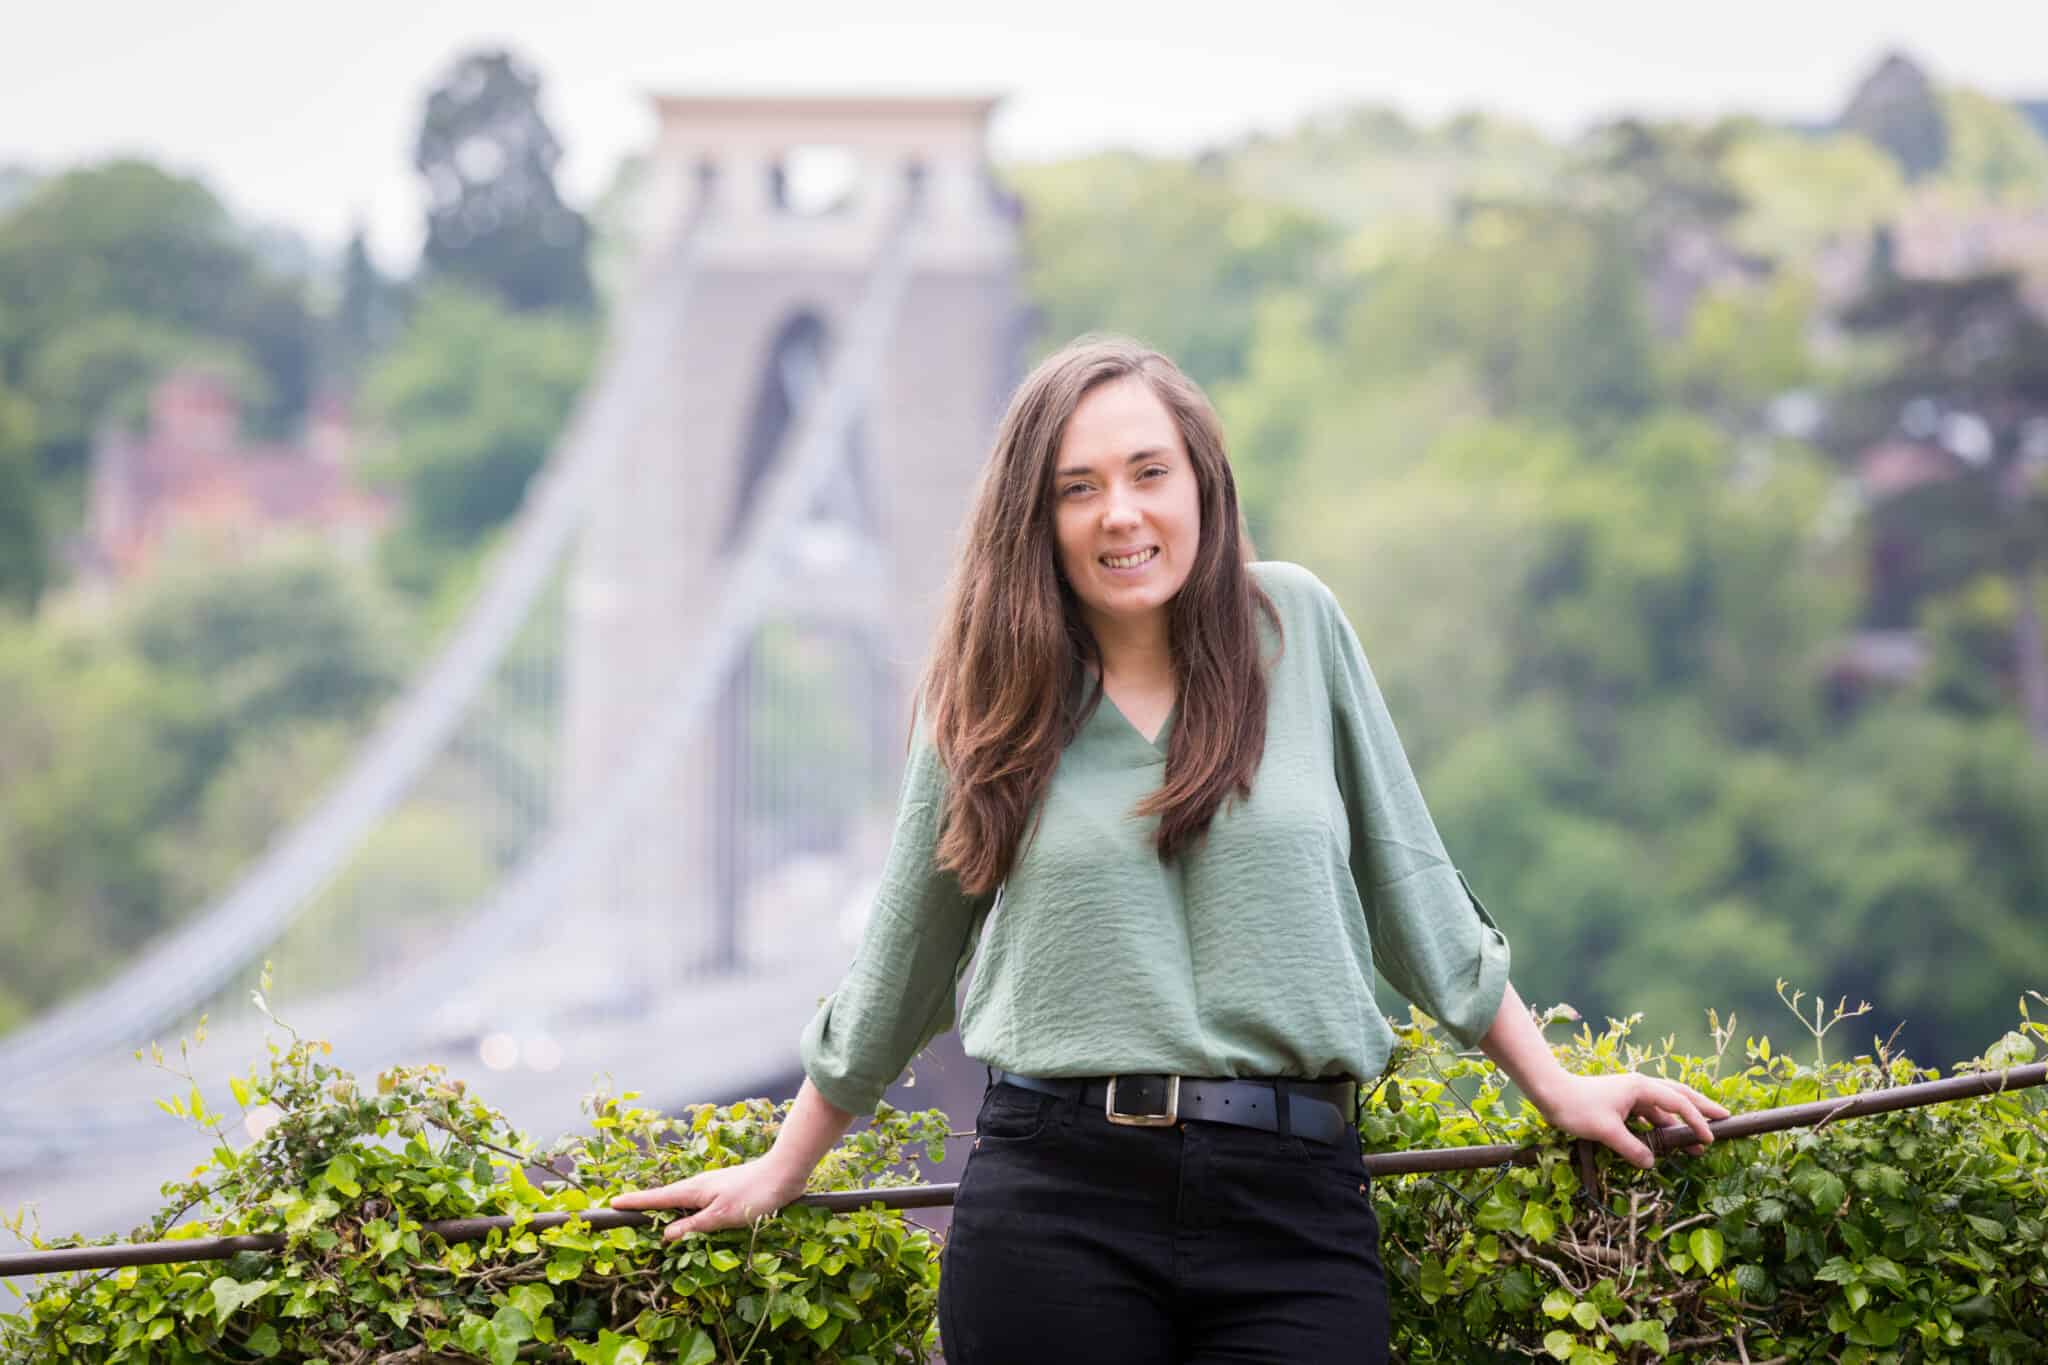 Jessie is leaning on a railing in front of Clifton Suspension Bridge. She is wearing a green blouse and black jeans.